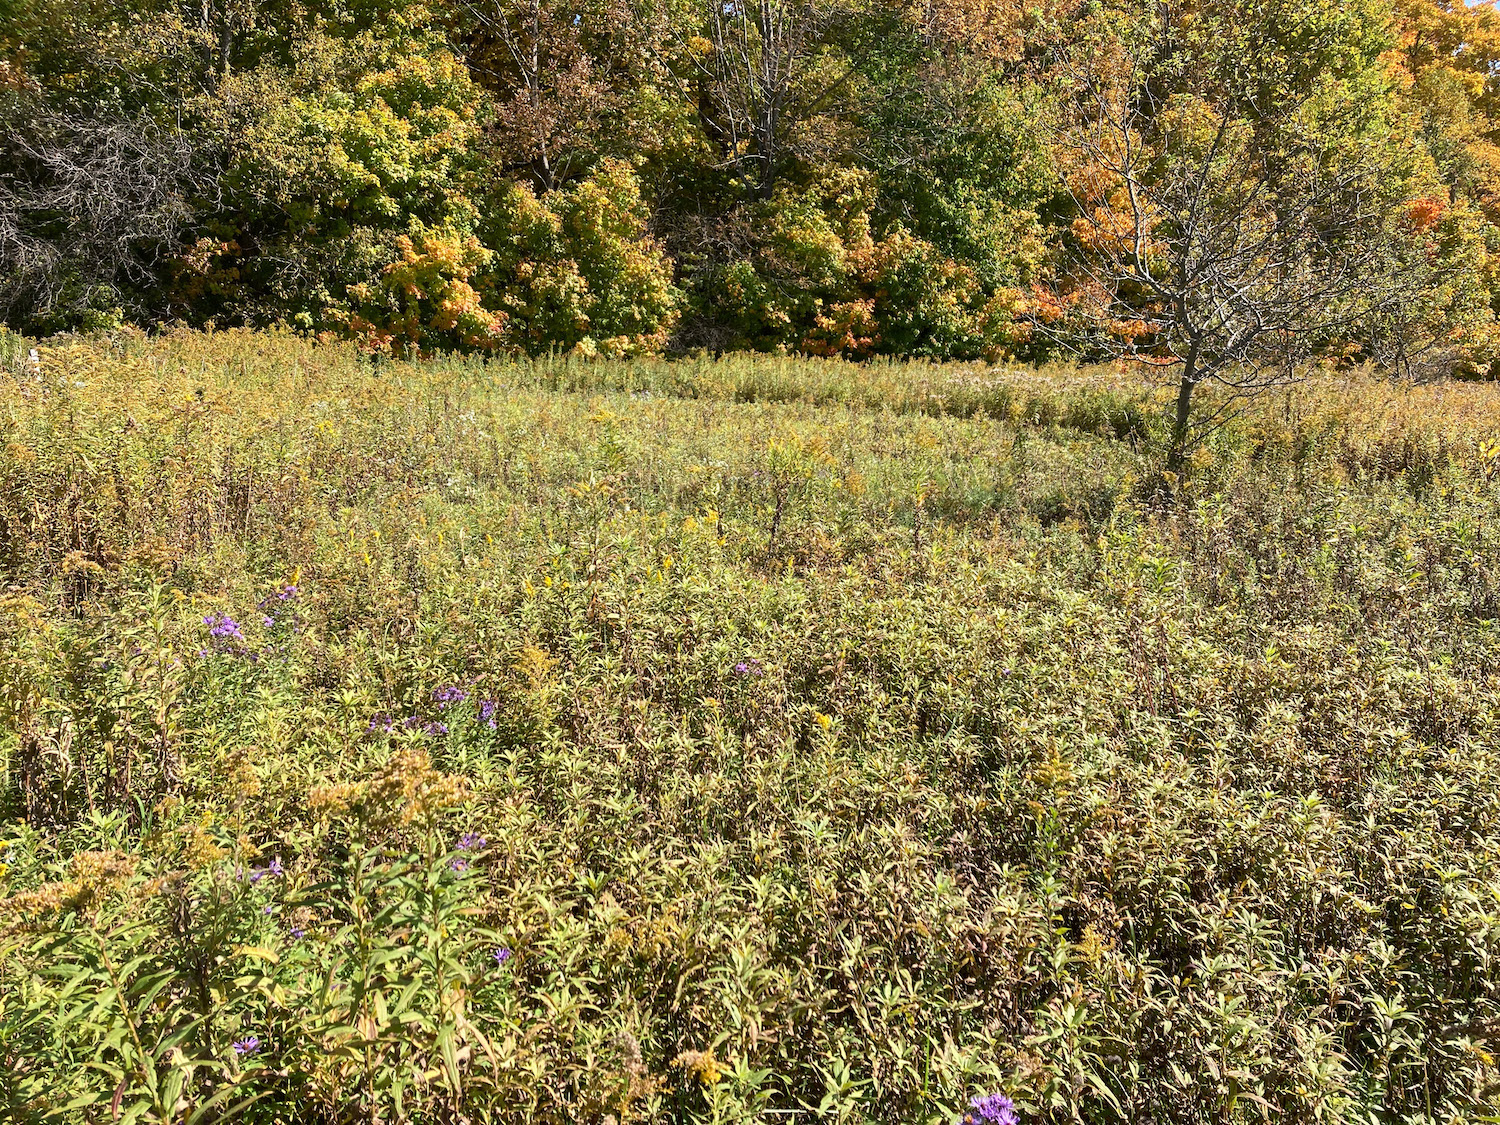 Goldenrod field in the fall with no blooms.